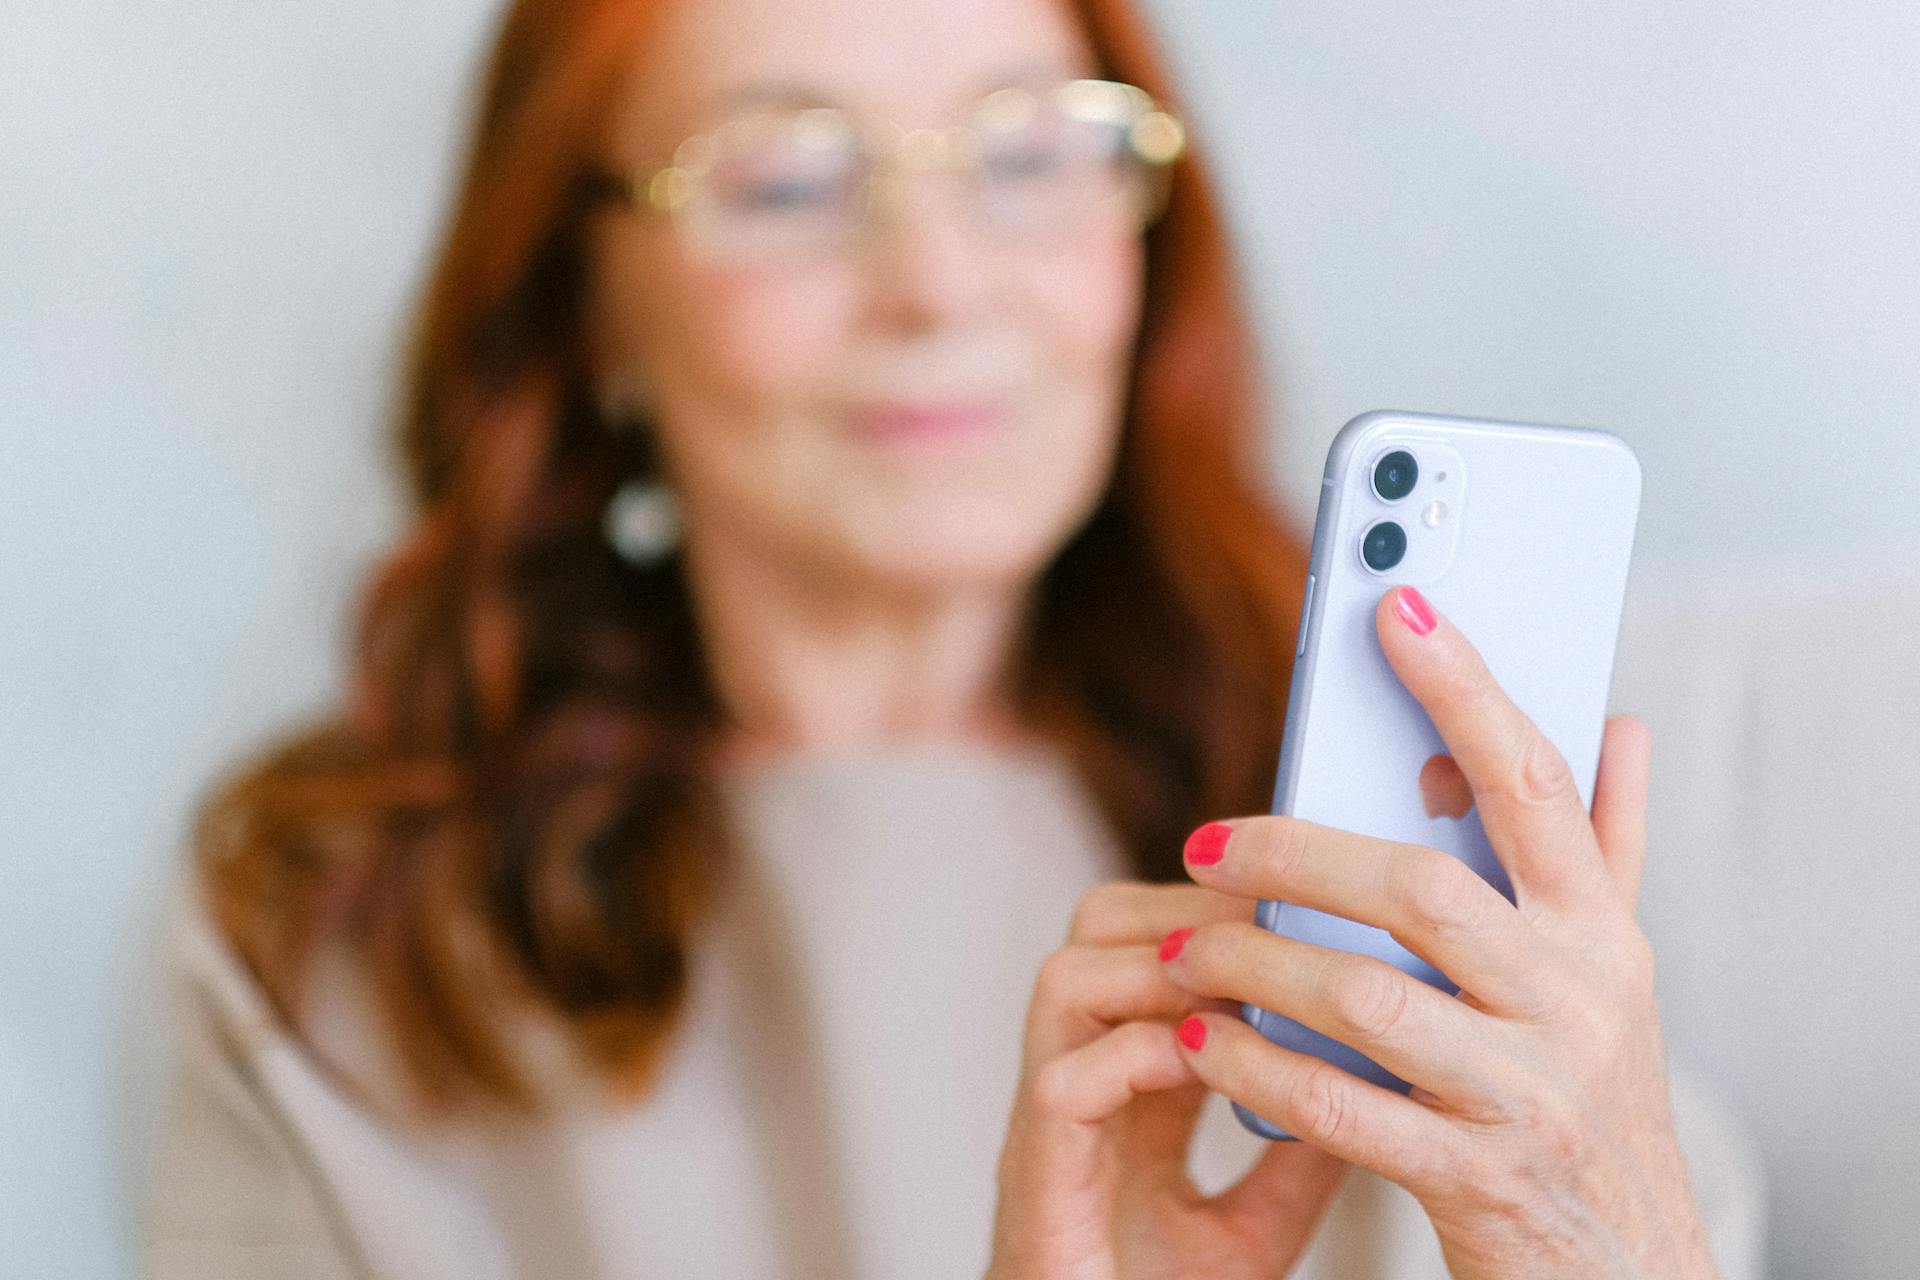 An old woman on a phone | Source: Pexels